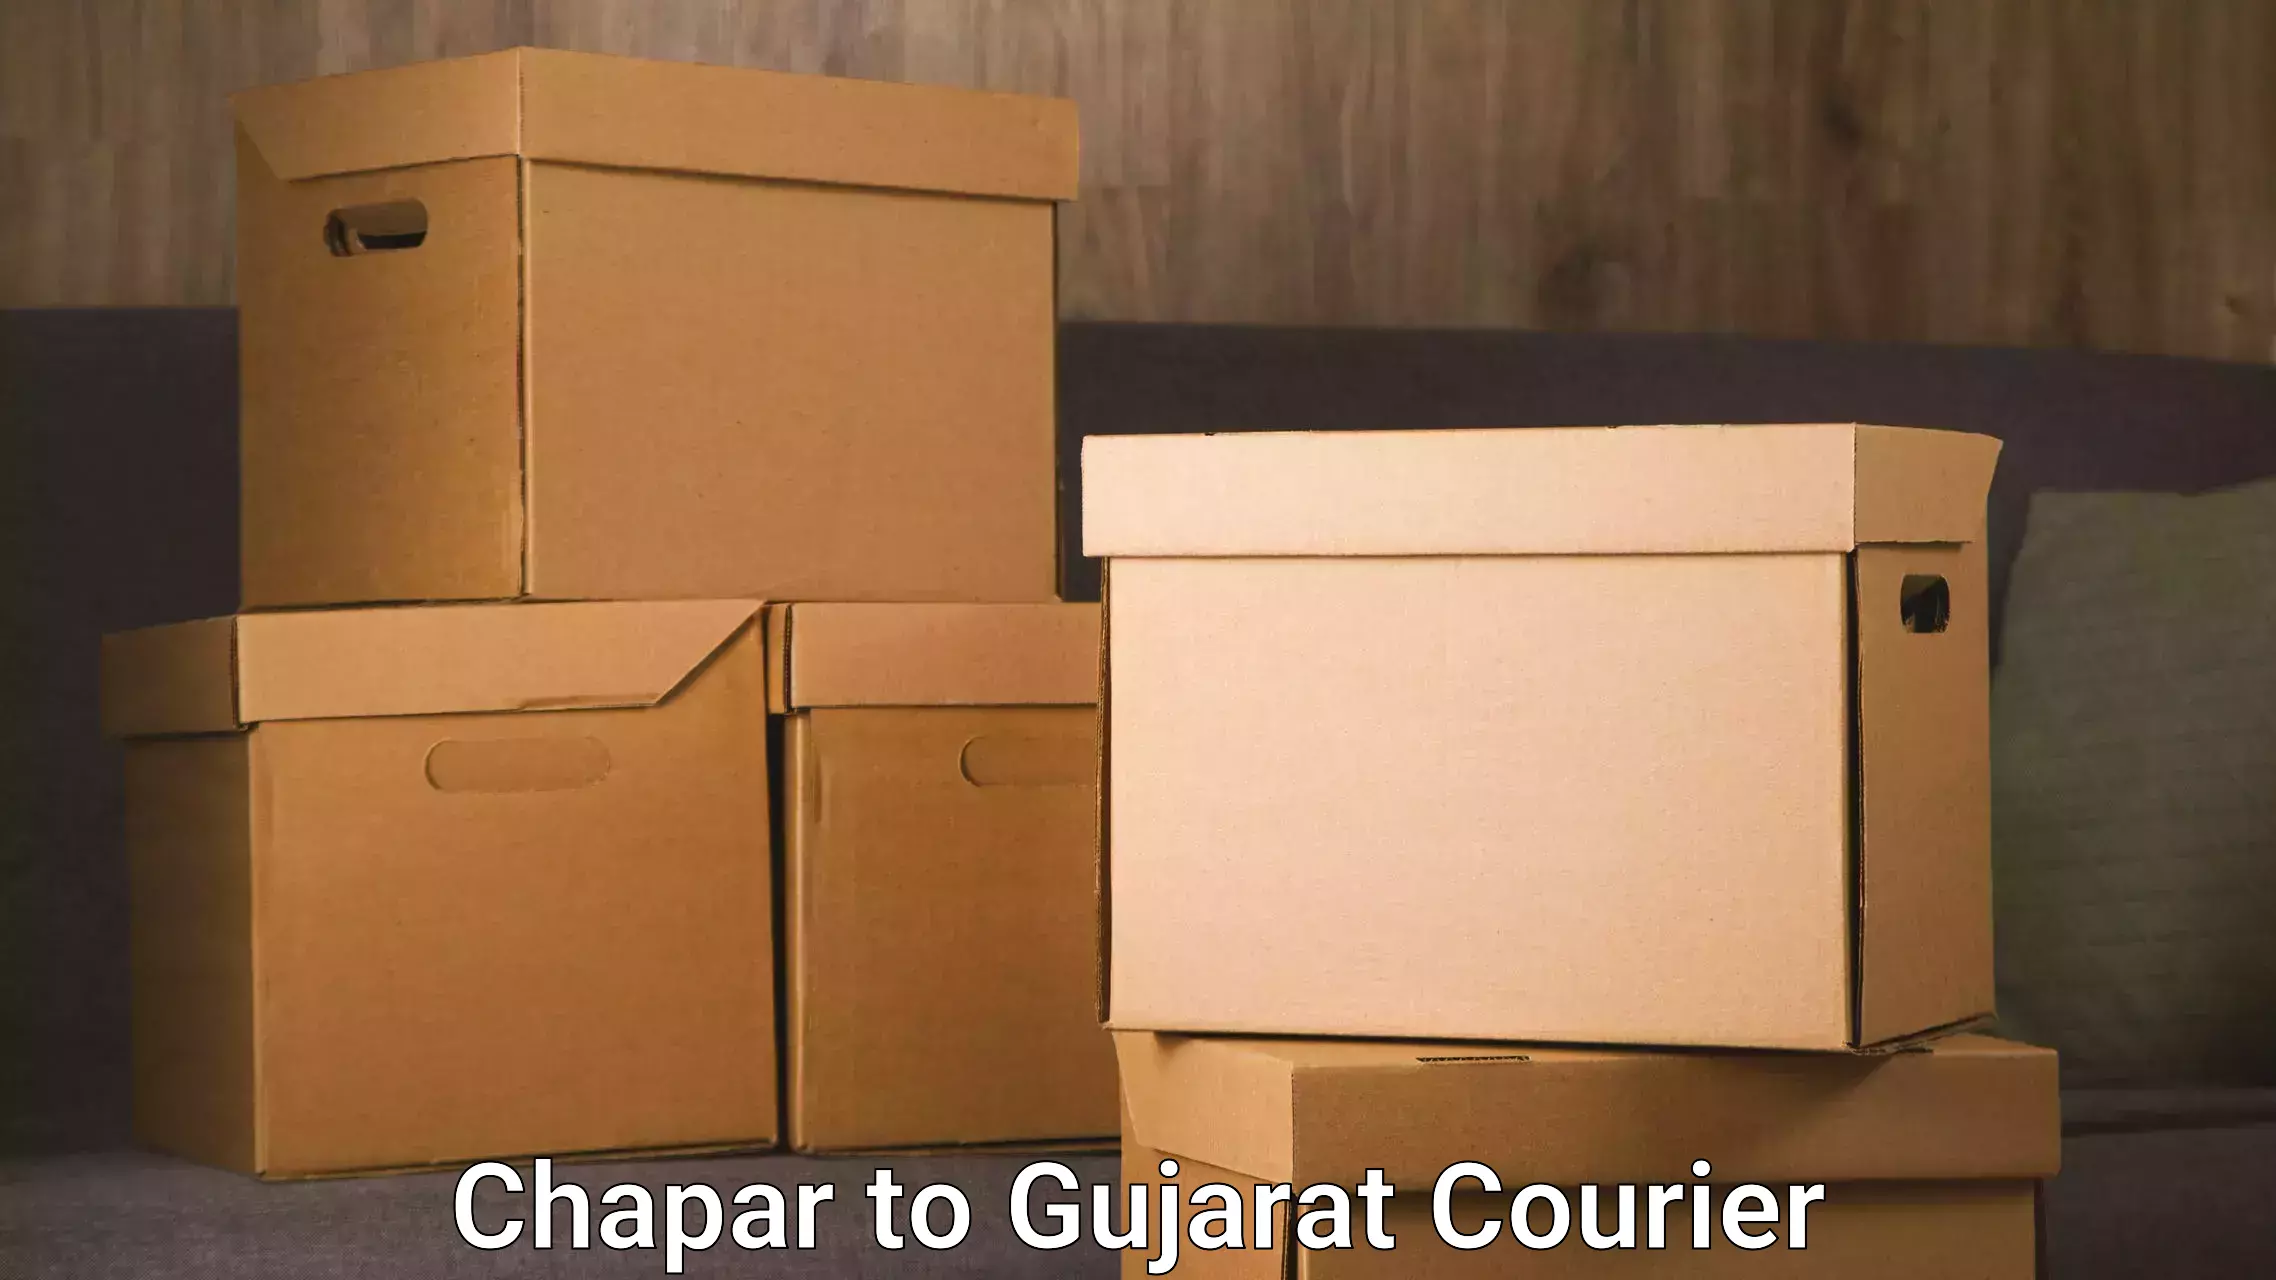 Global shipping networks Chapar to Anand Agricultural University